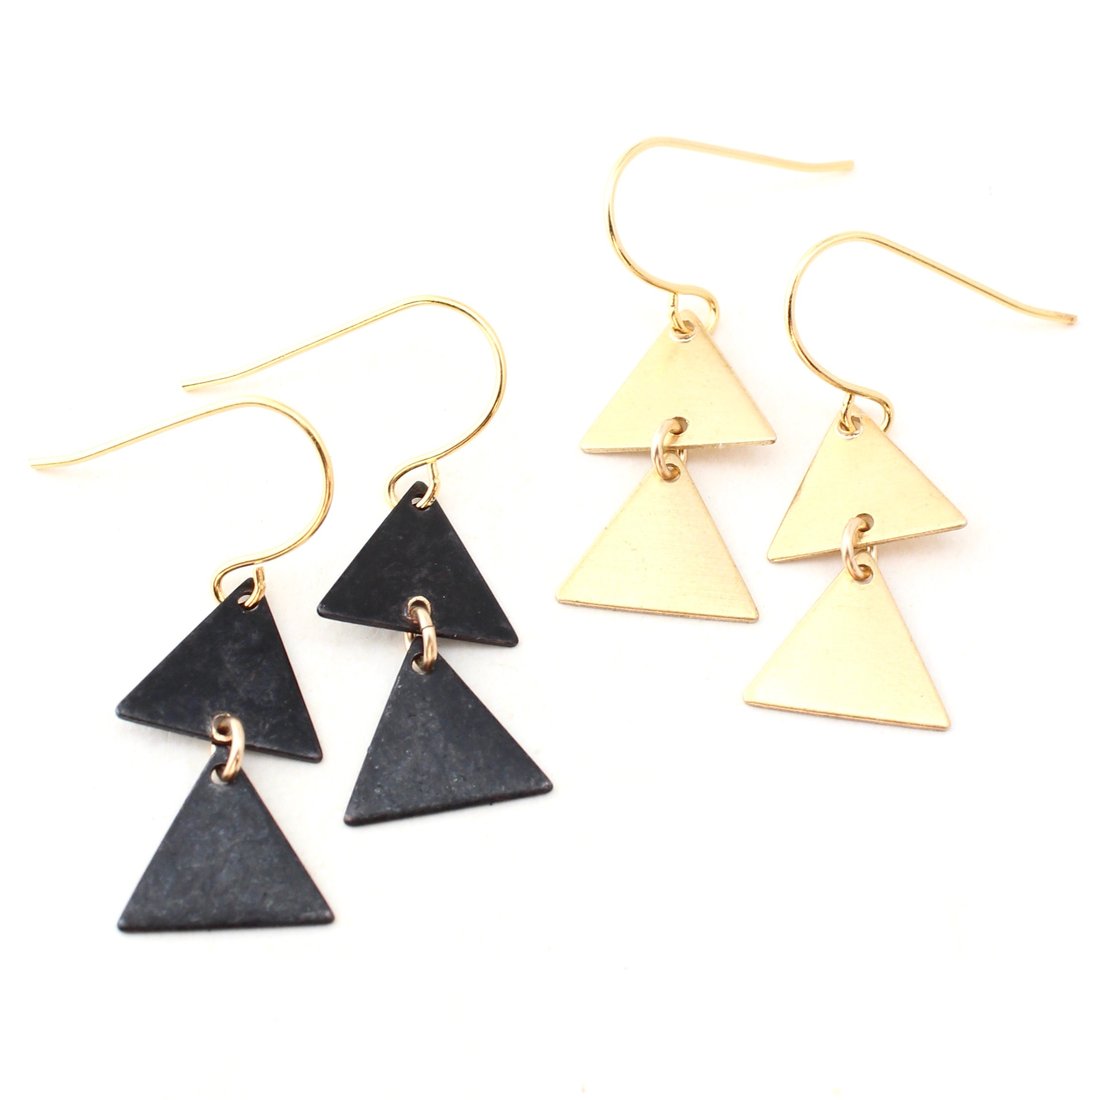 Rimi Earrings by Crafts and Love